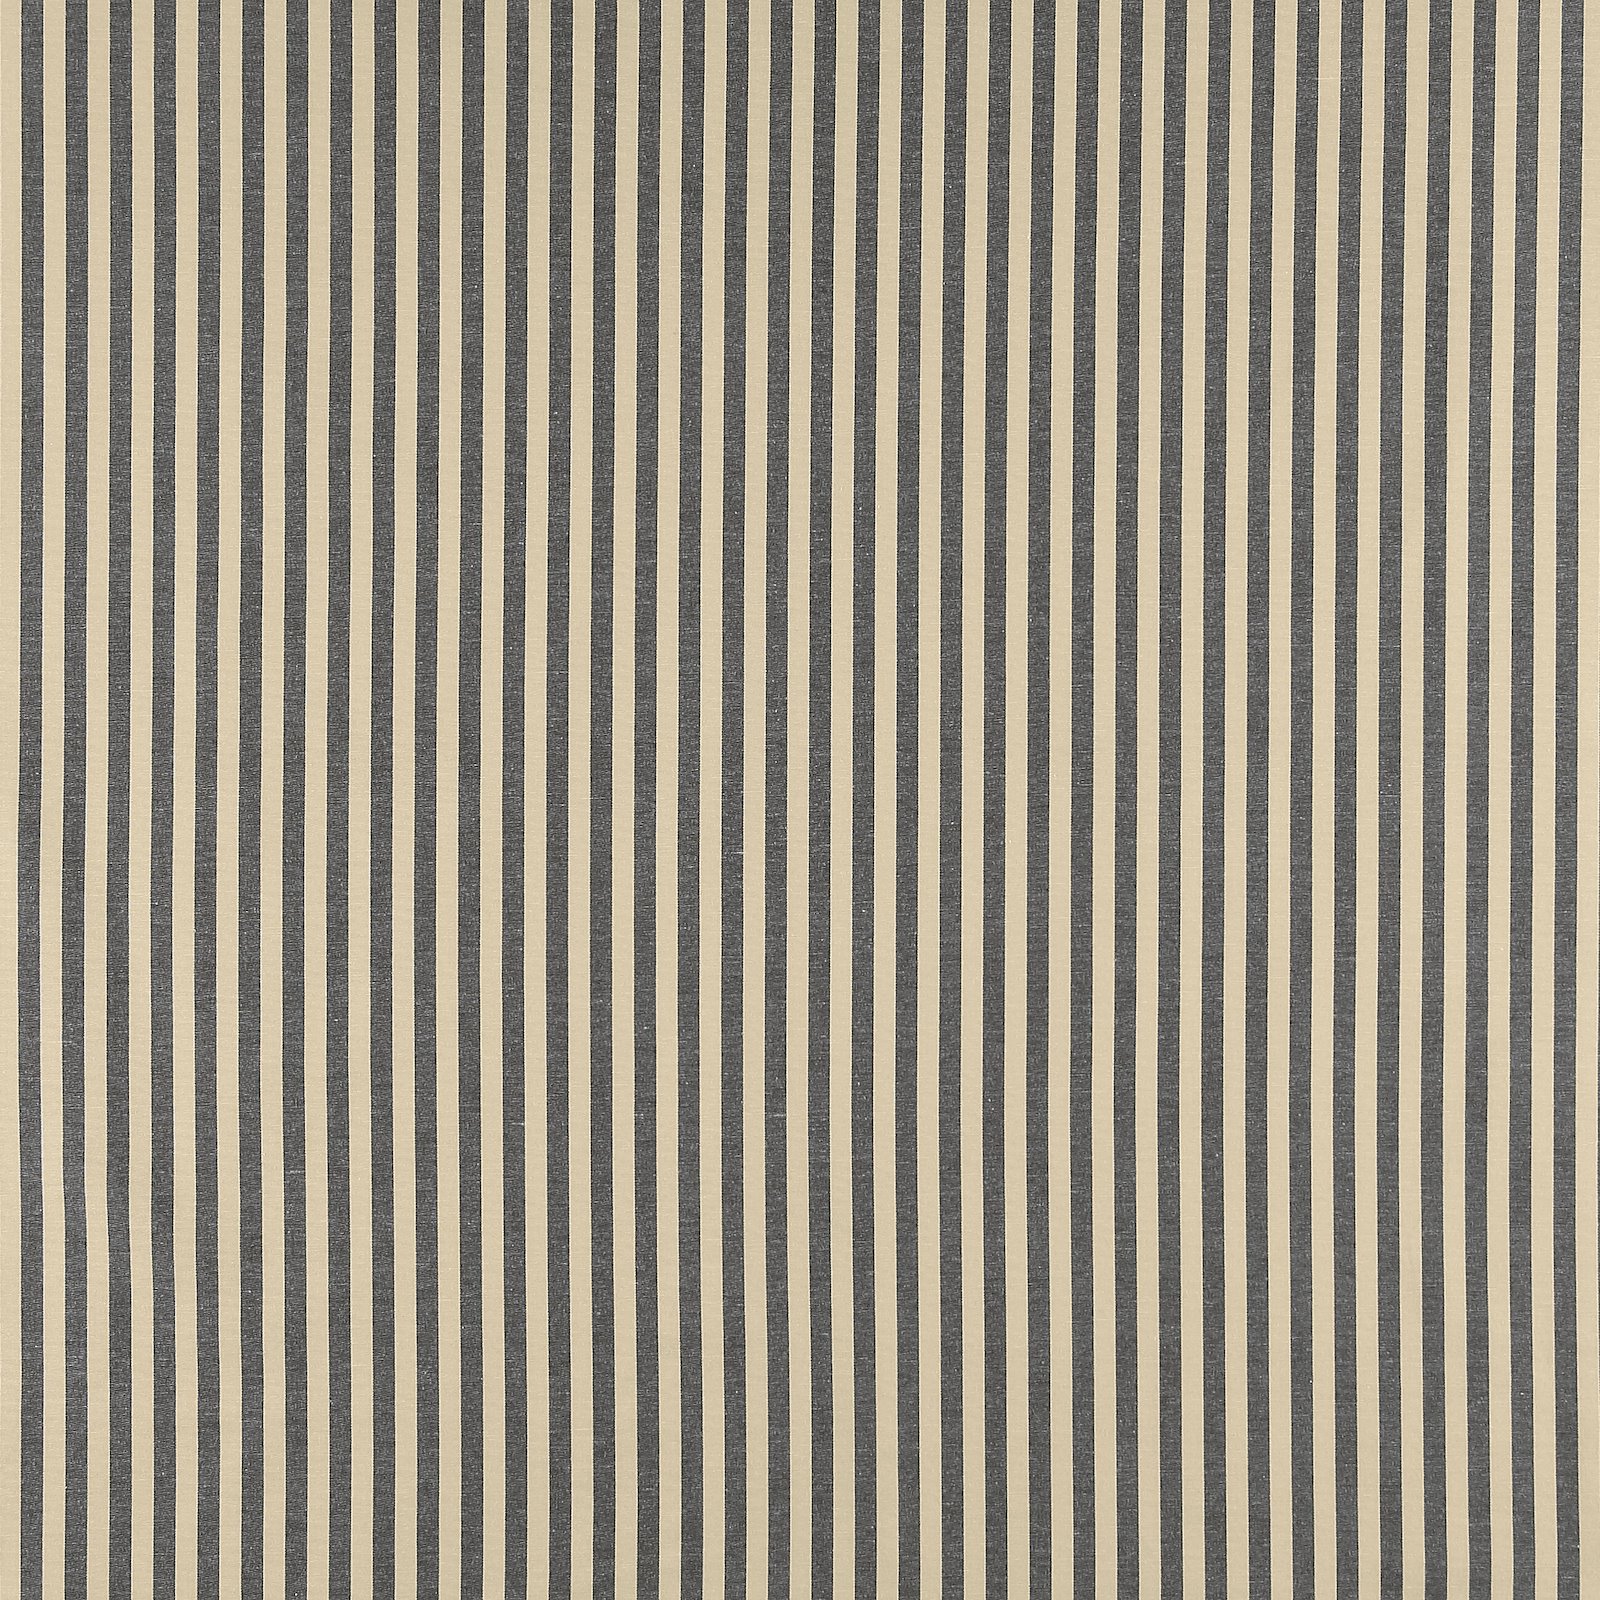 Woven sand/black striped yarn dyed 815665_pack_sp